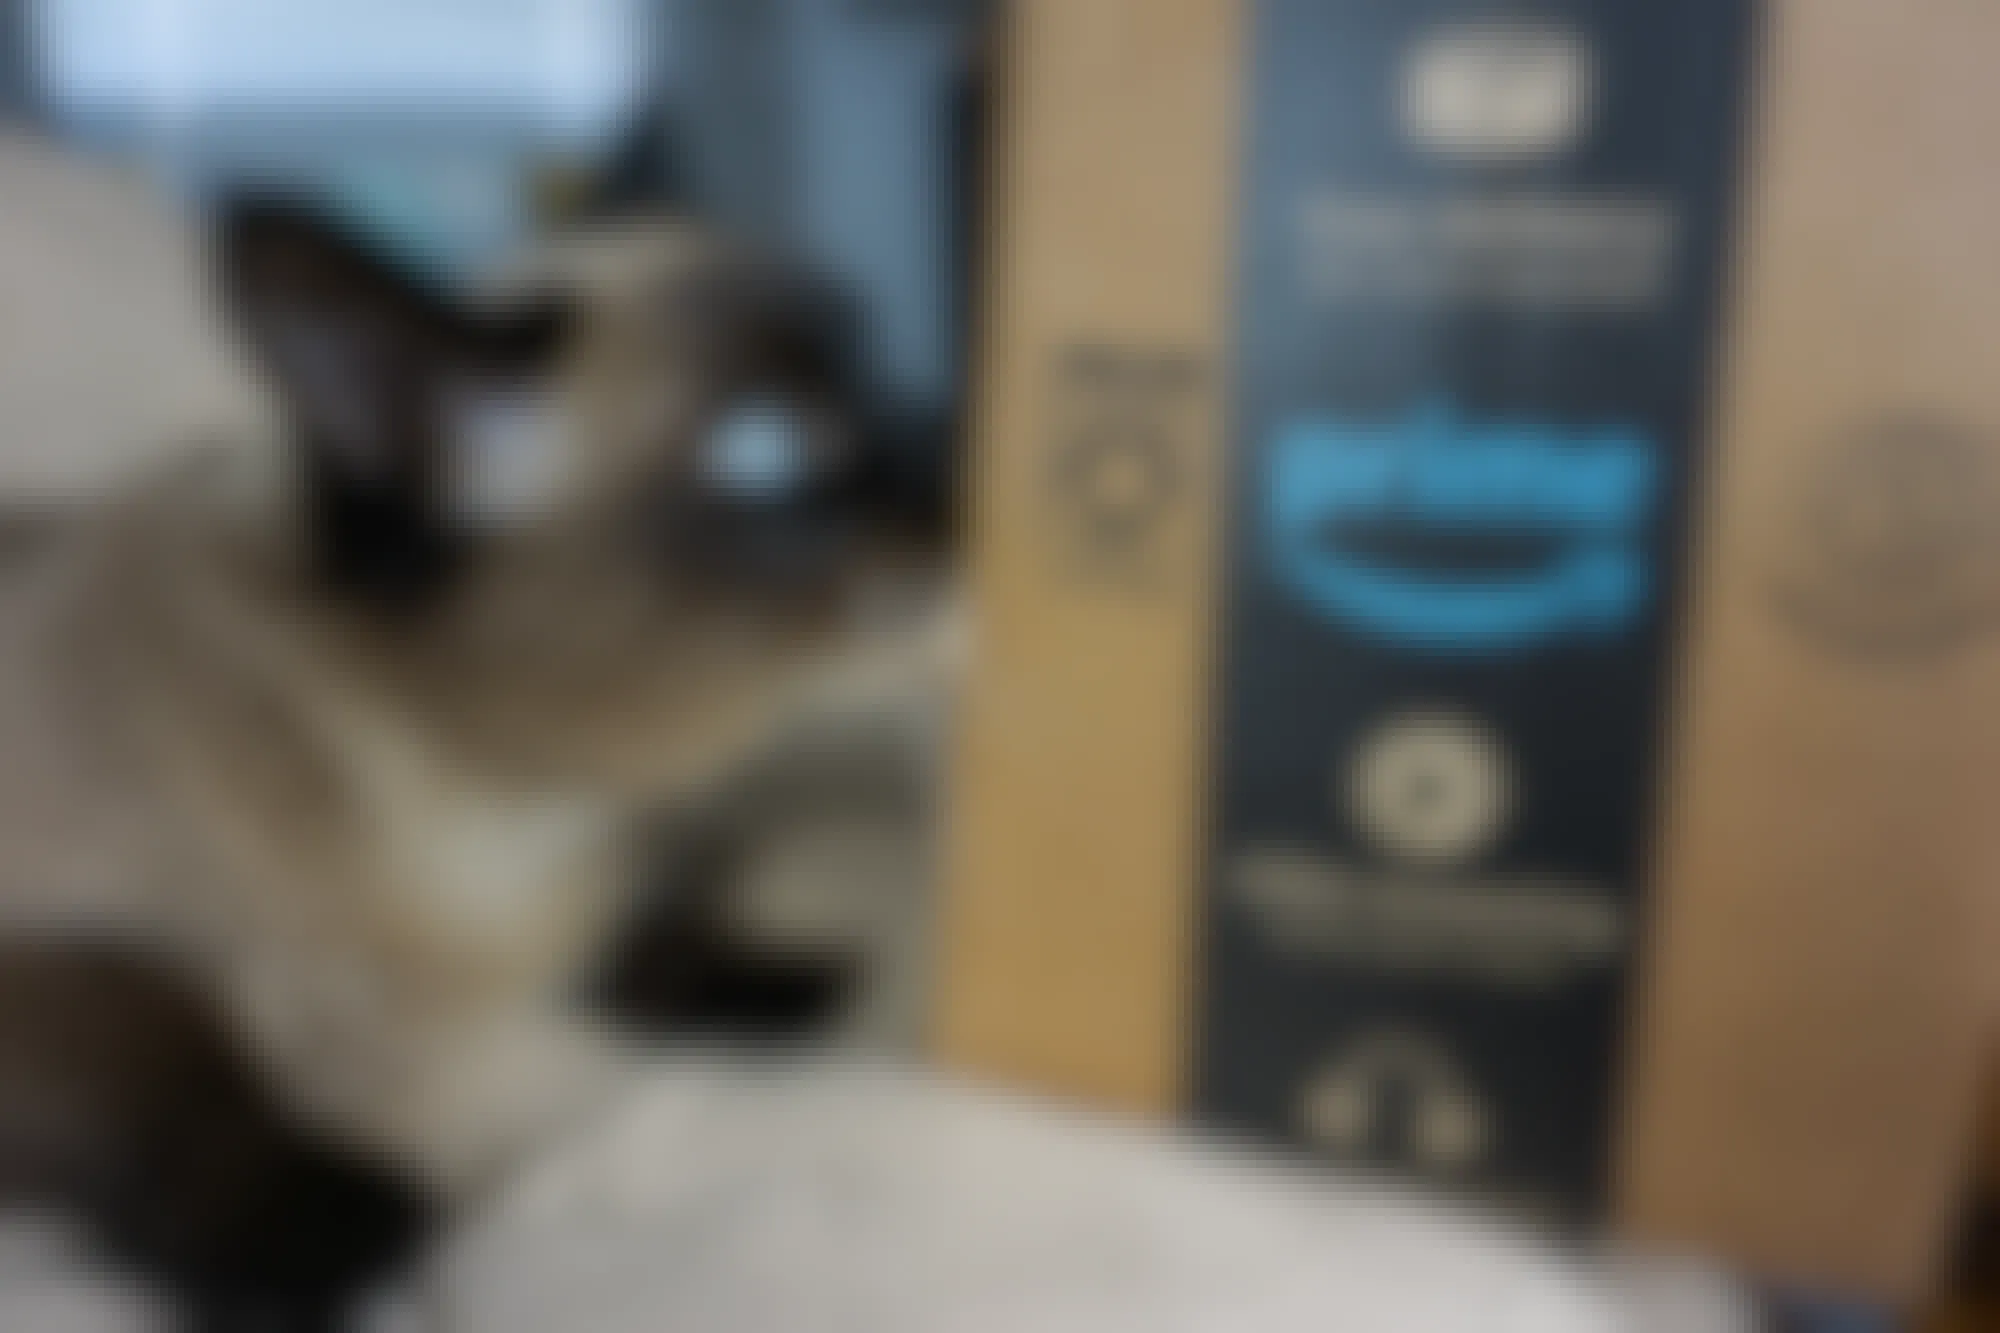 A cat with bright blue eyes sniffing an Amazon Prime box